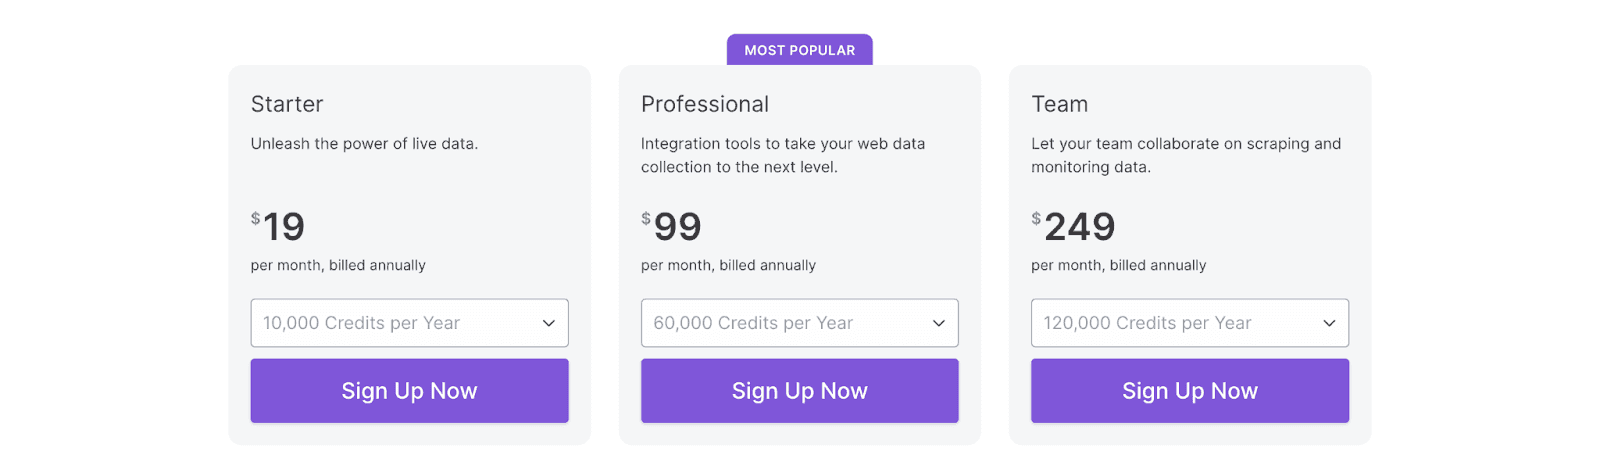 Browse AI pricing - Starter, Professional, Team